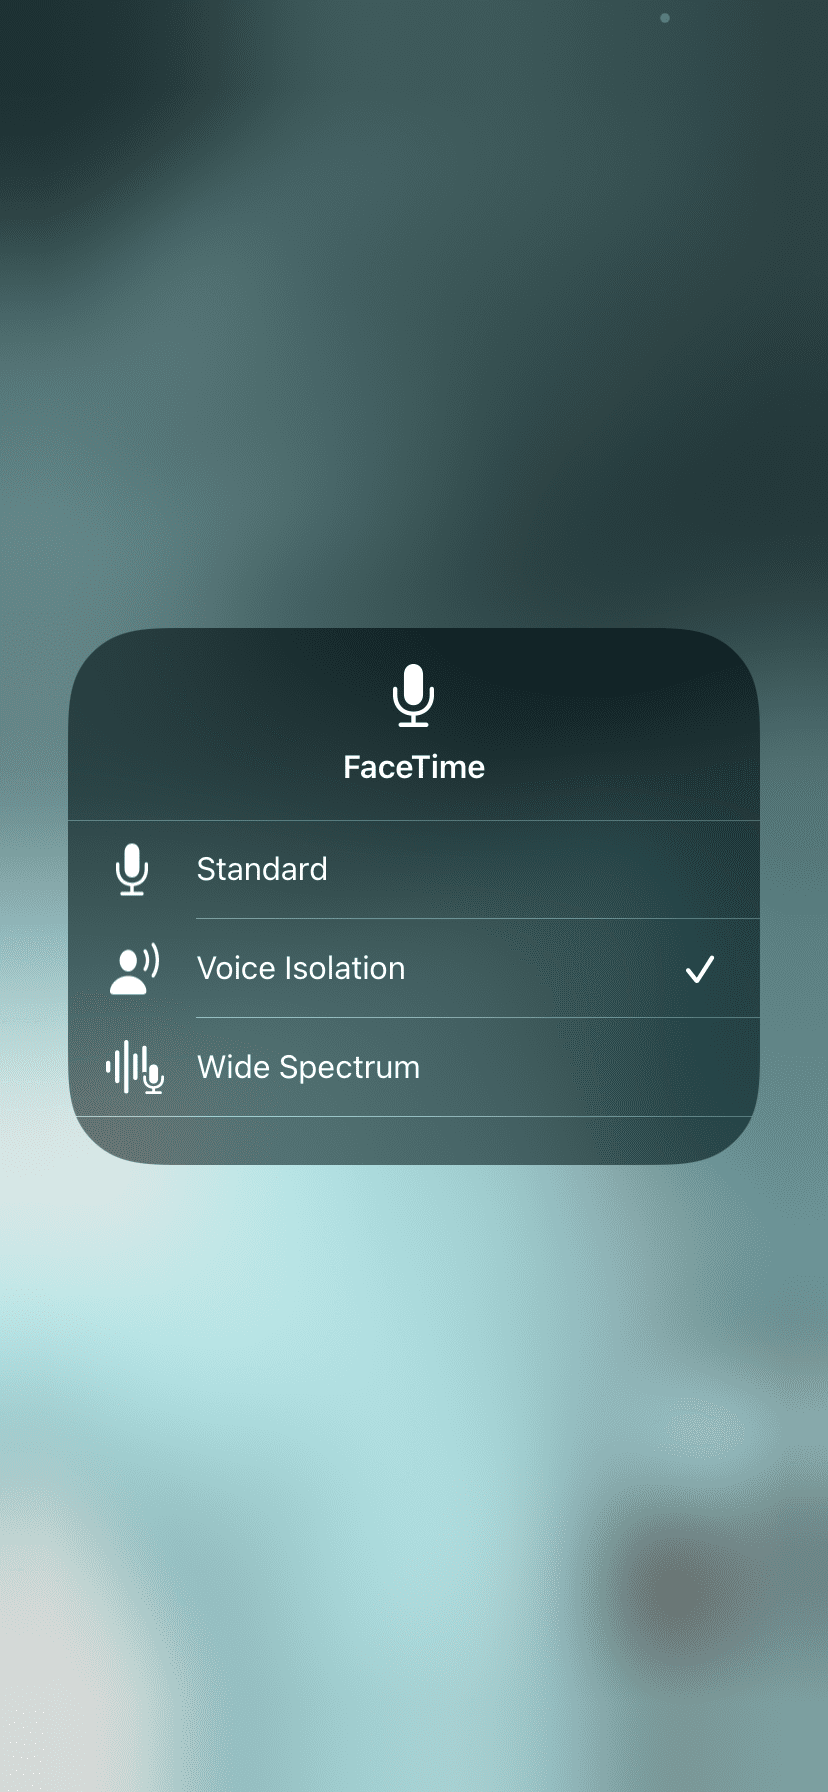 Select Voice Isolation to reduce ambient noise in FaceTime Call on iPhone